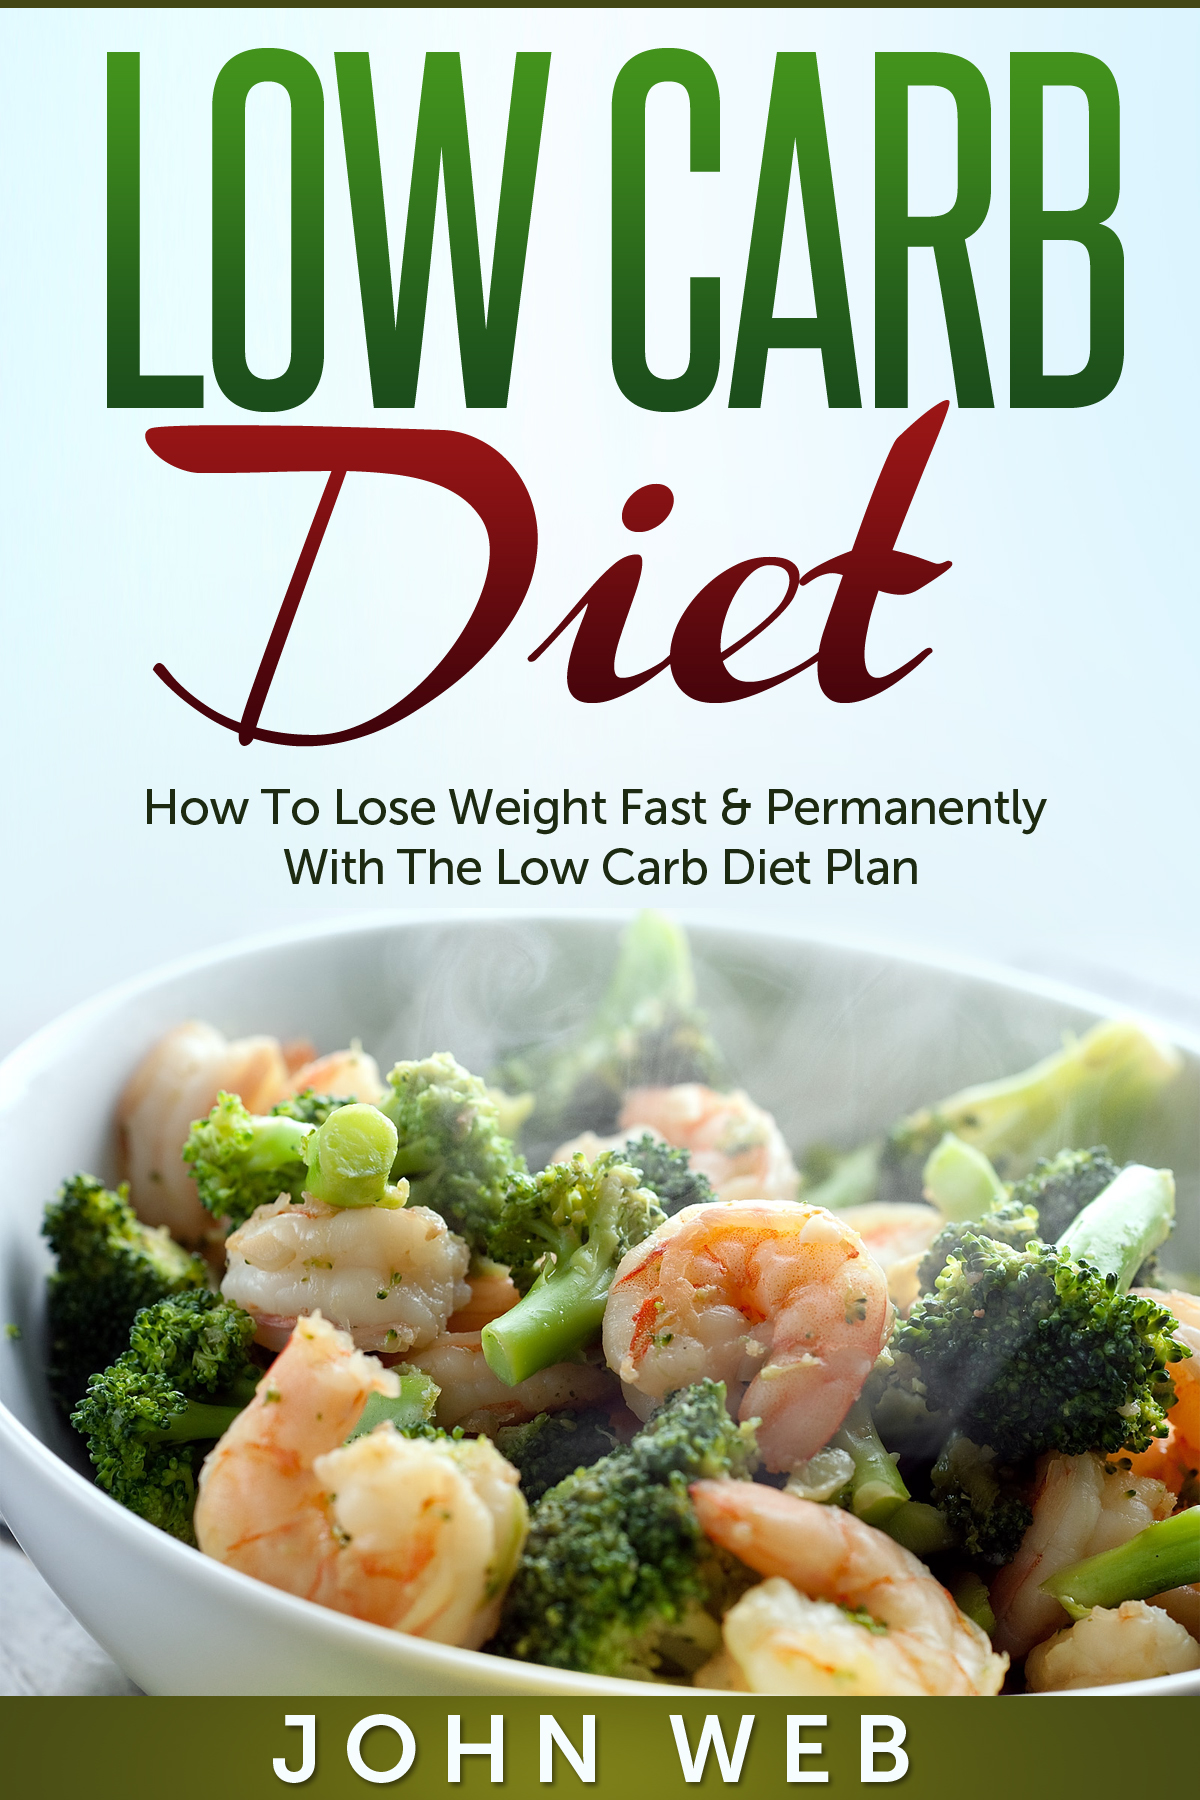 Low Carb: Low Carb Diet – How To Lose Weight Fast & Permanently With The Low Carb Diet Plan by John Web